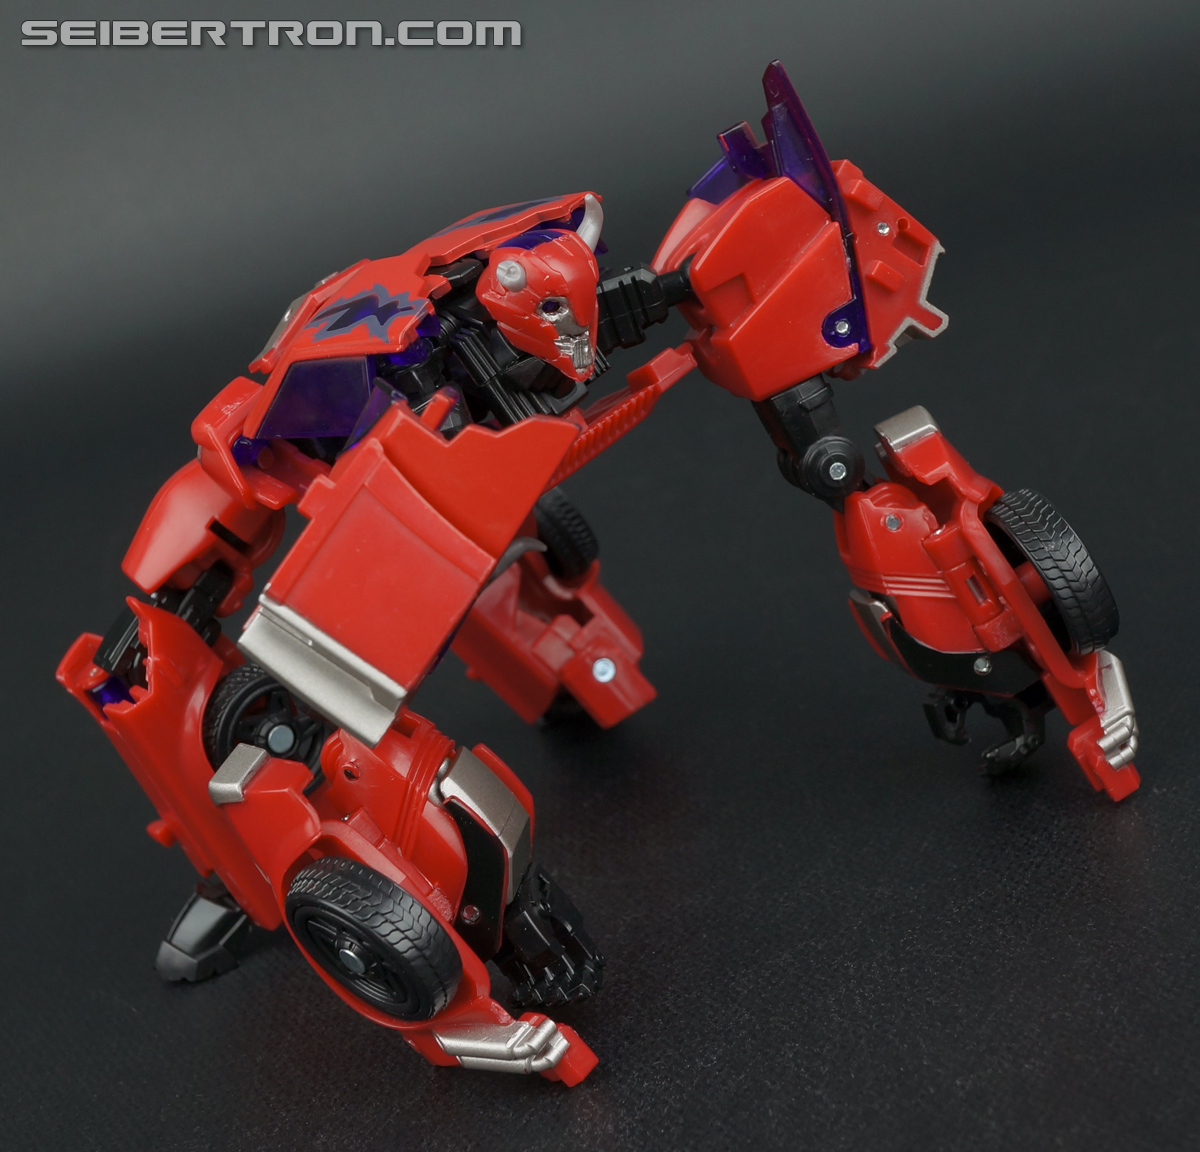 Transformers Prime: First Edition Terrorcon Cliffjumper (Image #146 of 179)